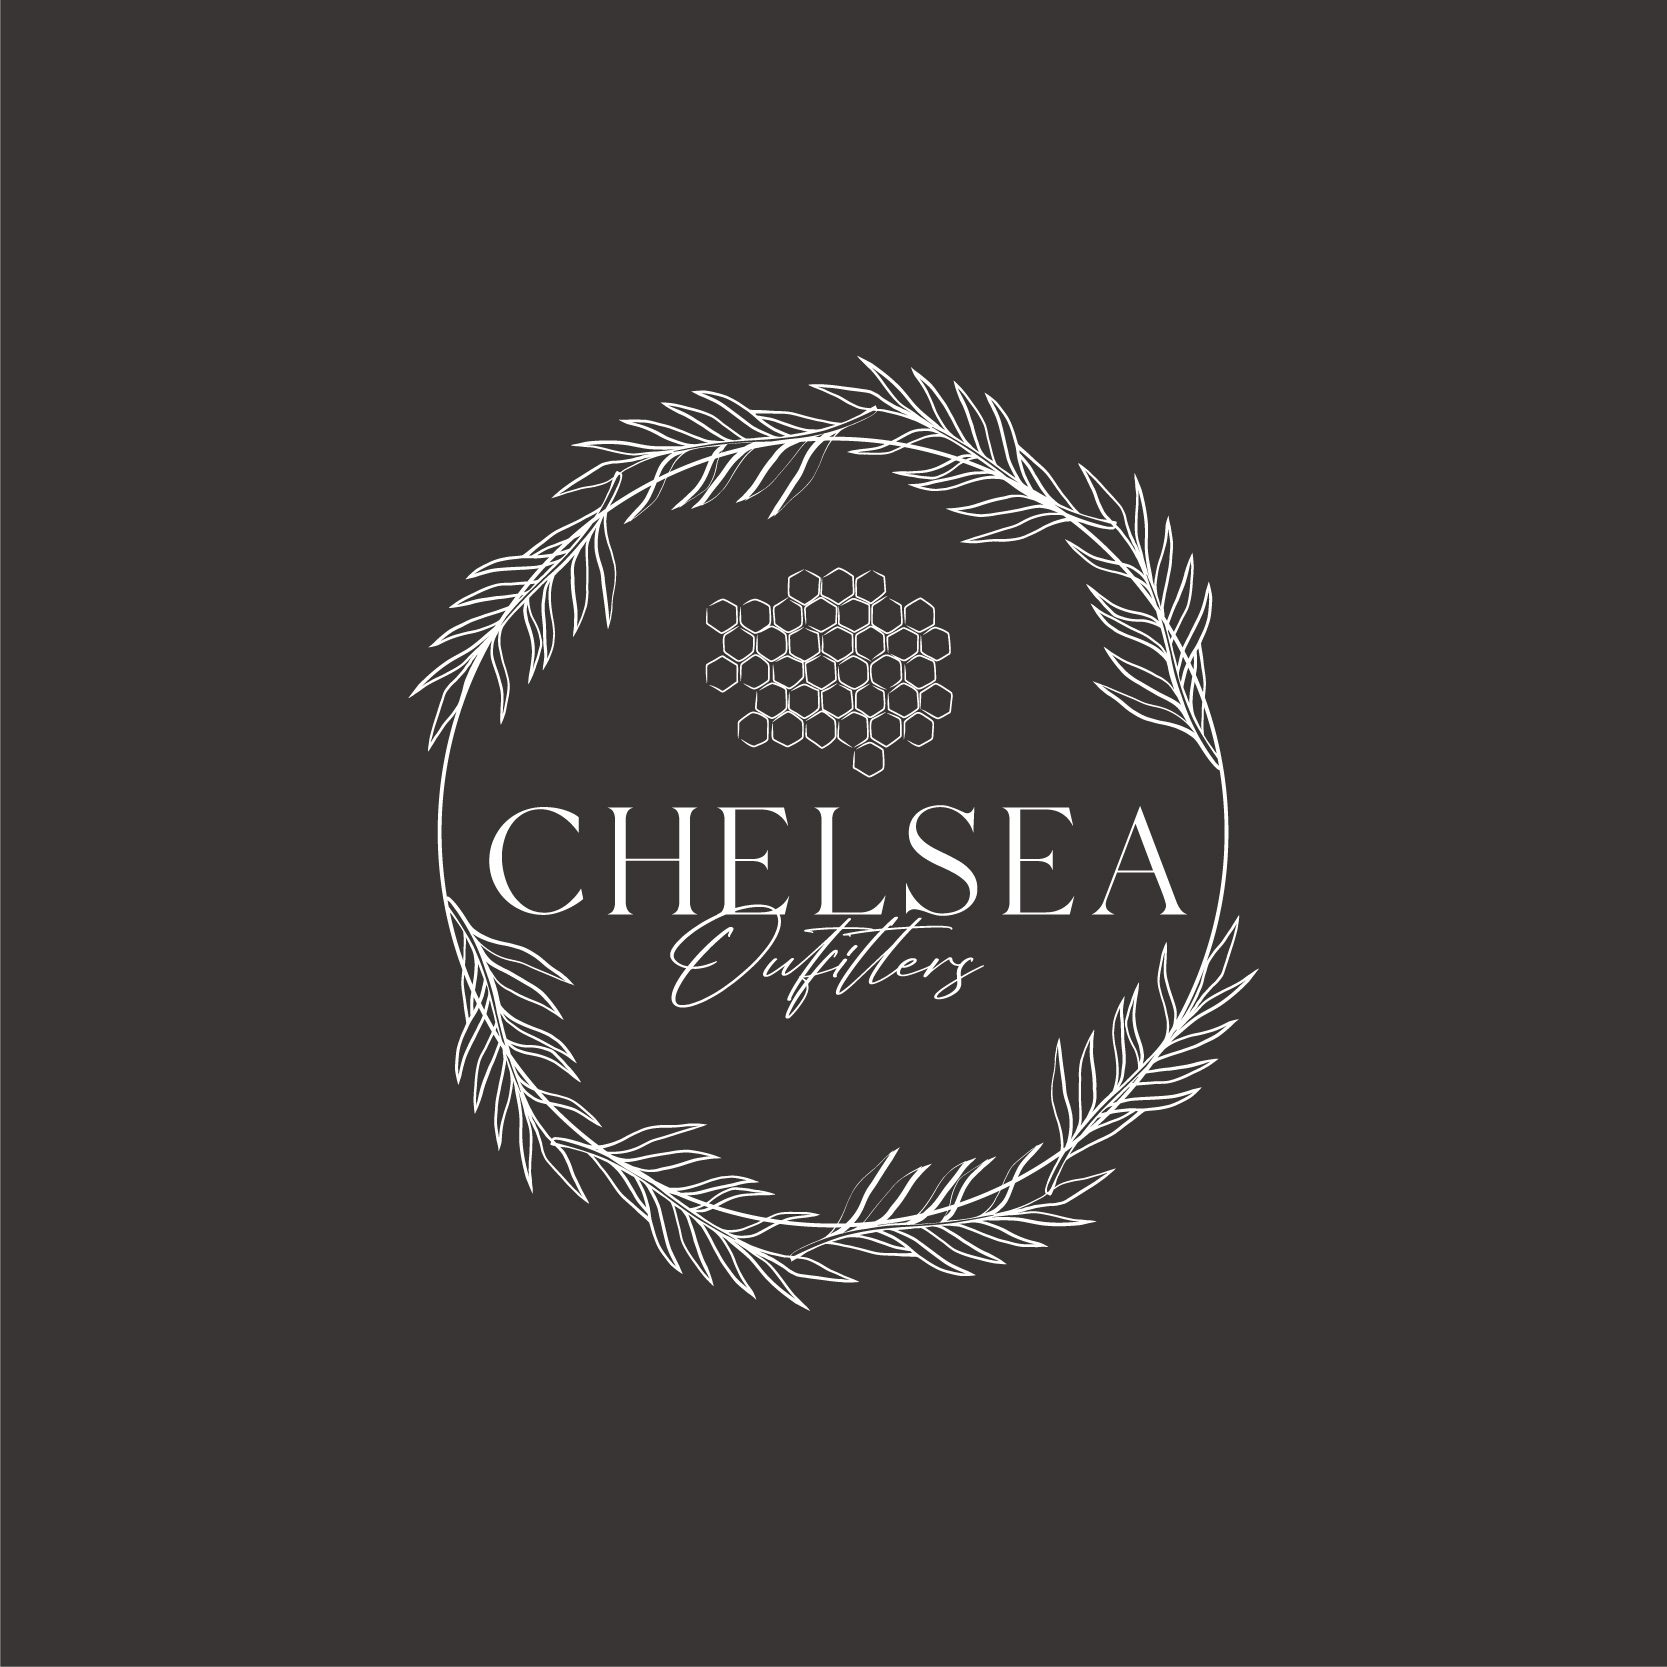 Chelsea Outfitters